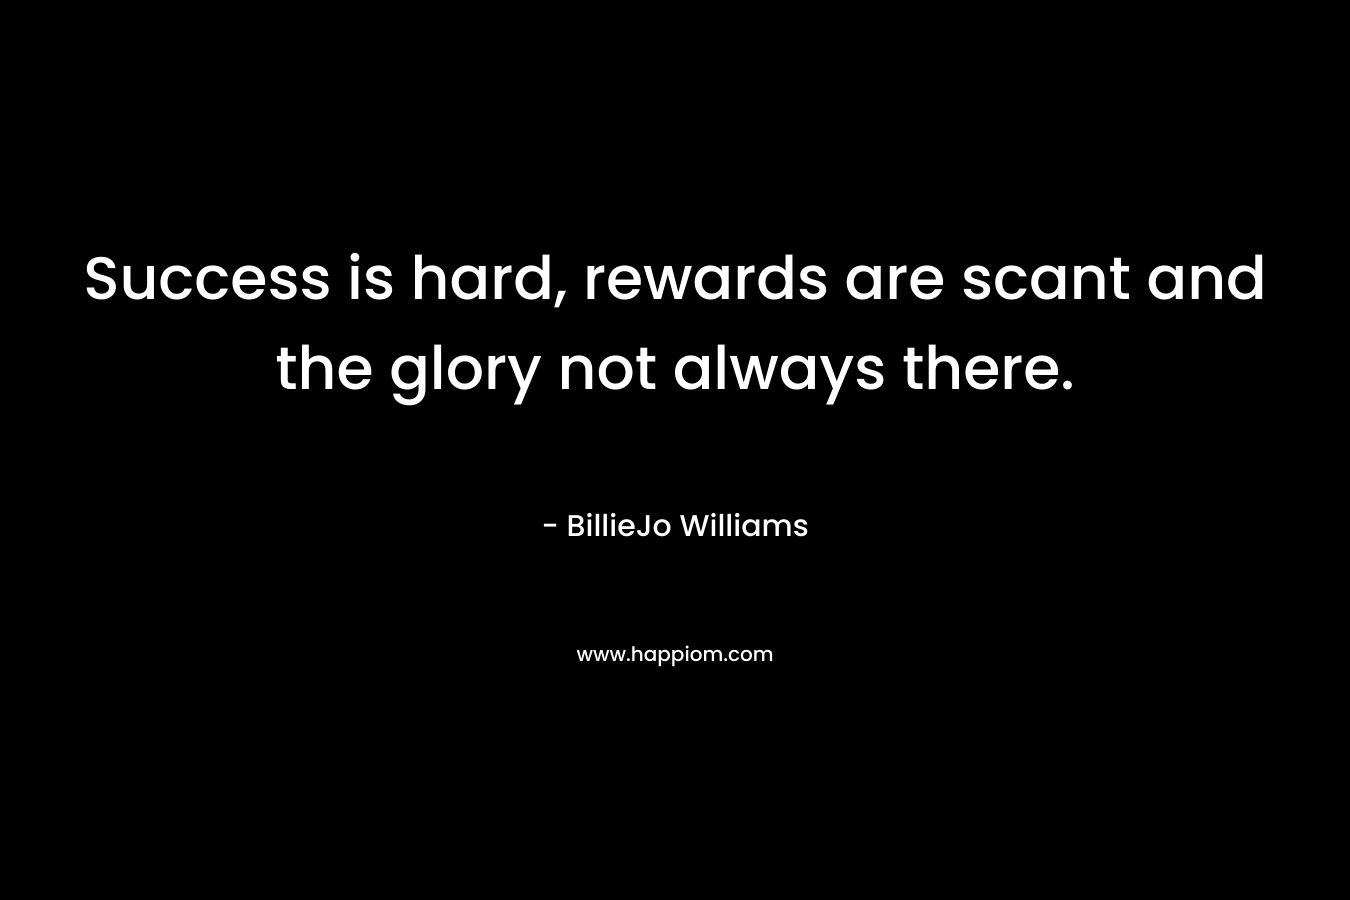 Success is hard, rewards are scant and the glory not always there.